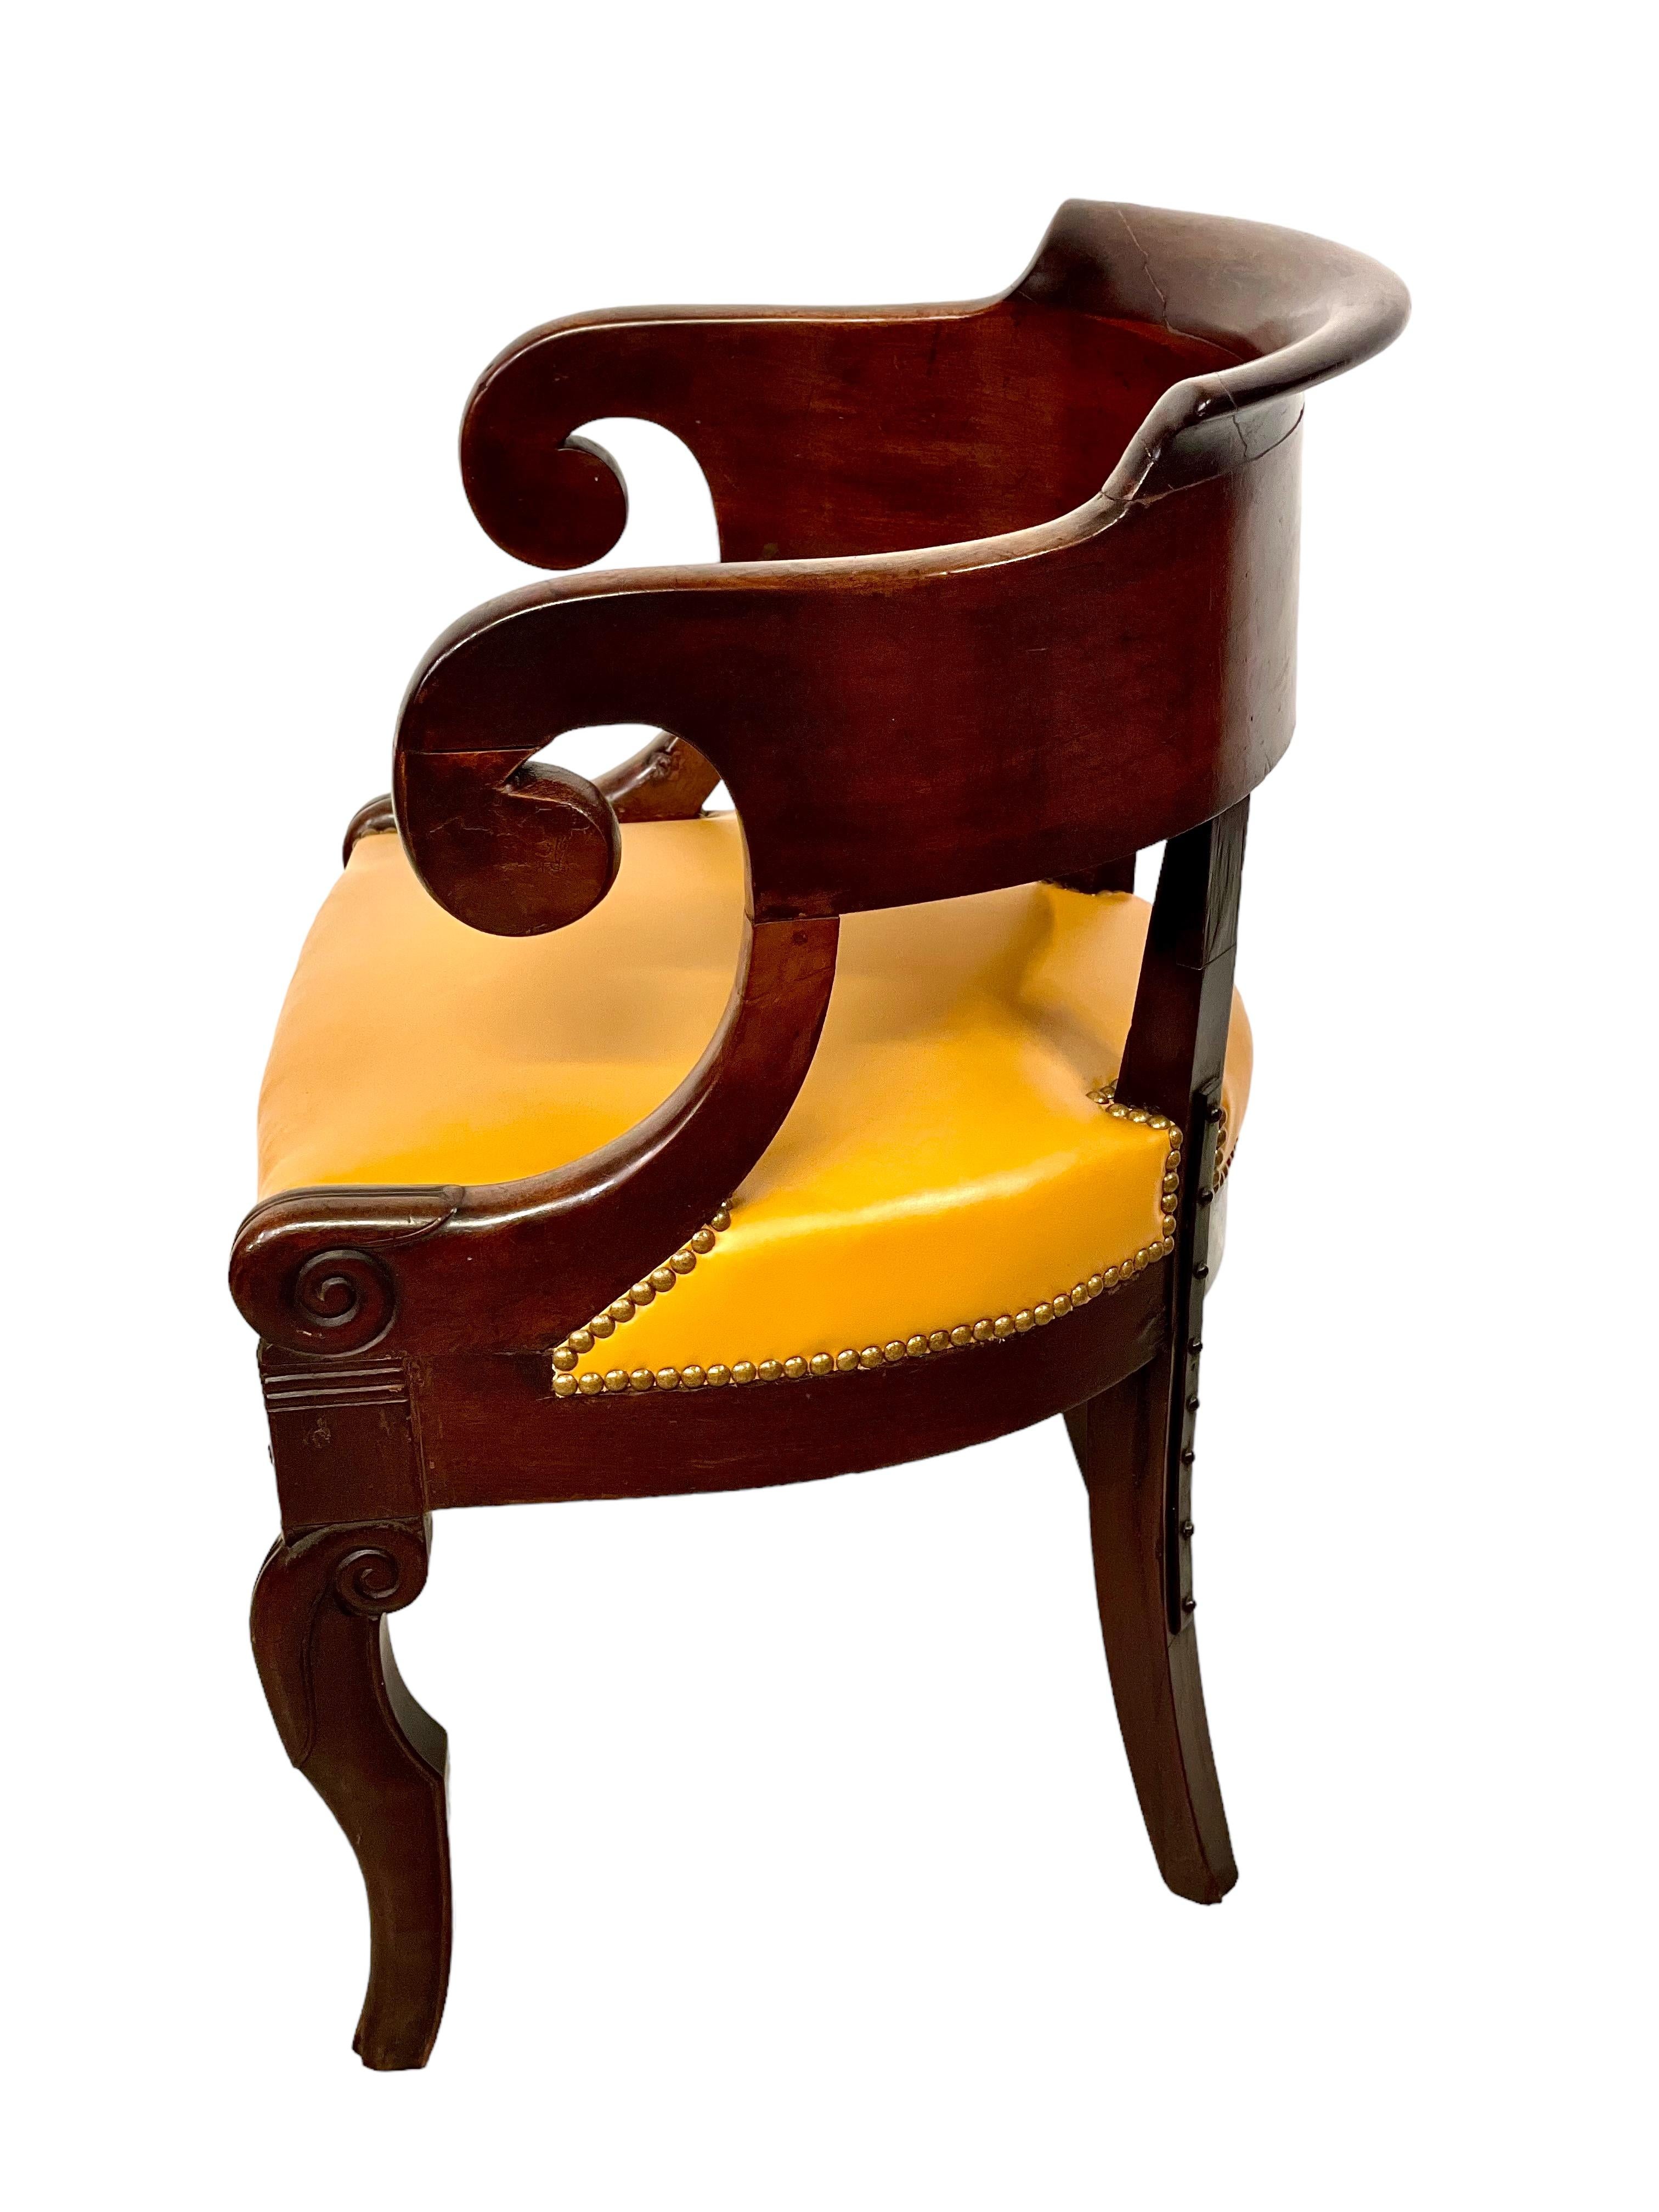 A handsome and well-proportioned French Empire period office chair, featuring a wonderfully curved gondola backrest and comfortable, padded golden leather upholstered seat, secured all round with nailhead trim. The carved and shaped front legs and